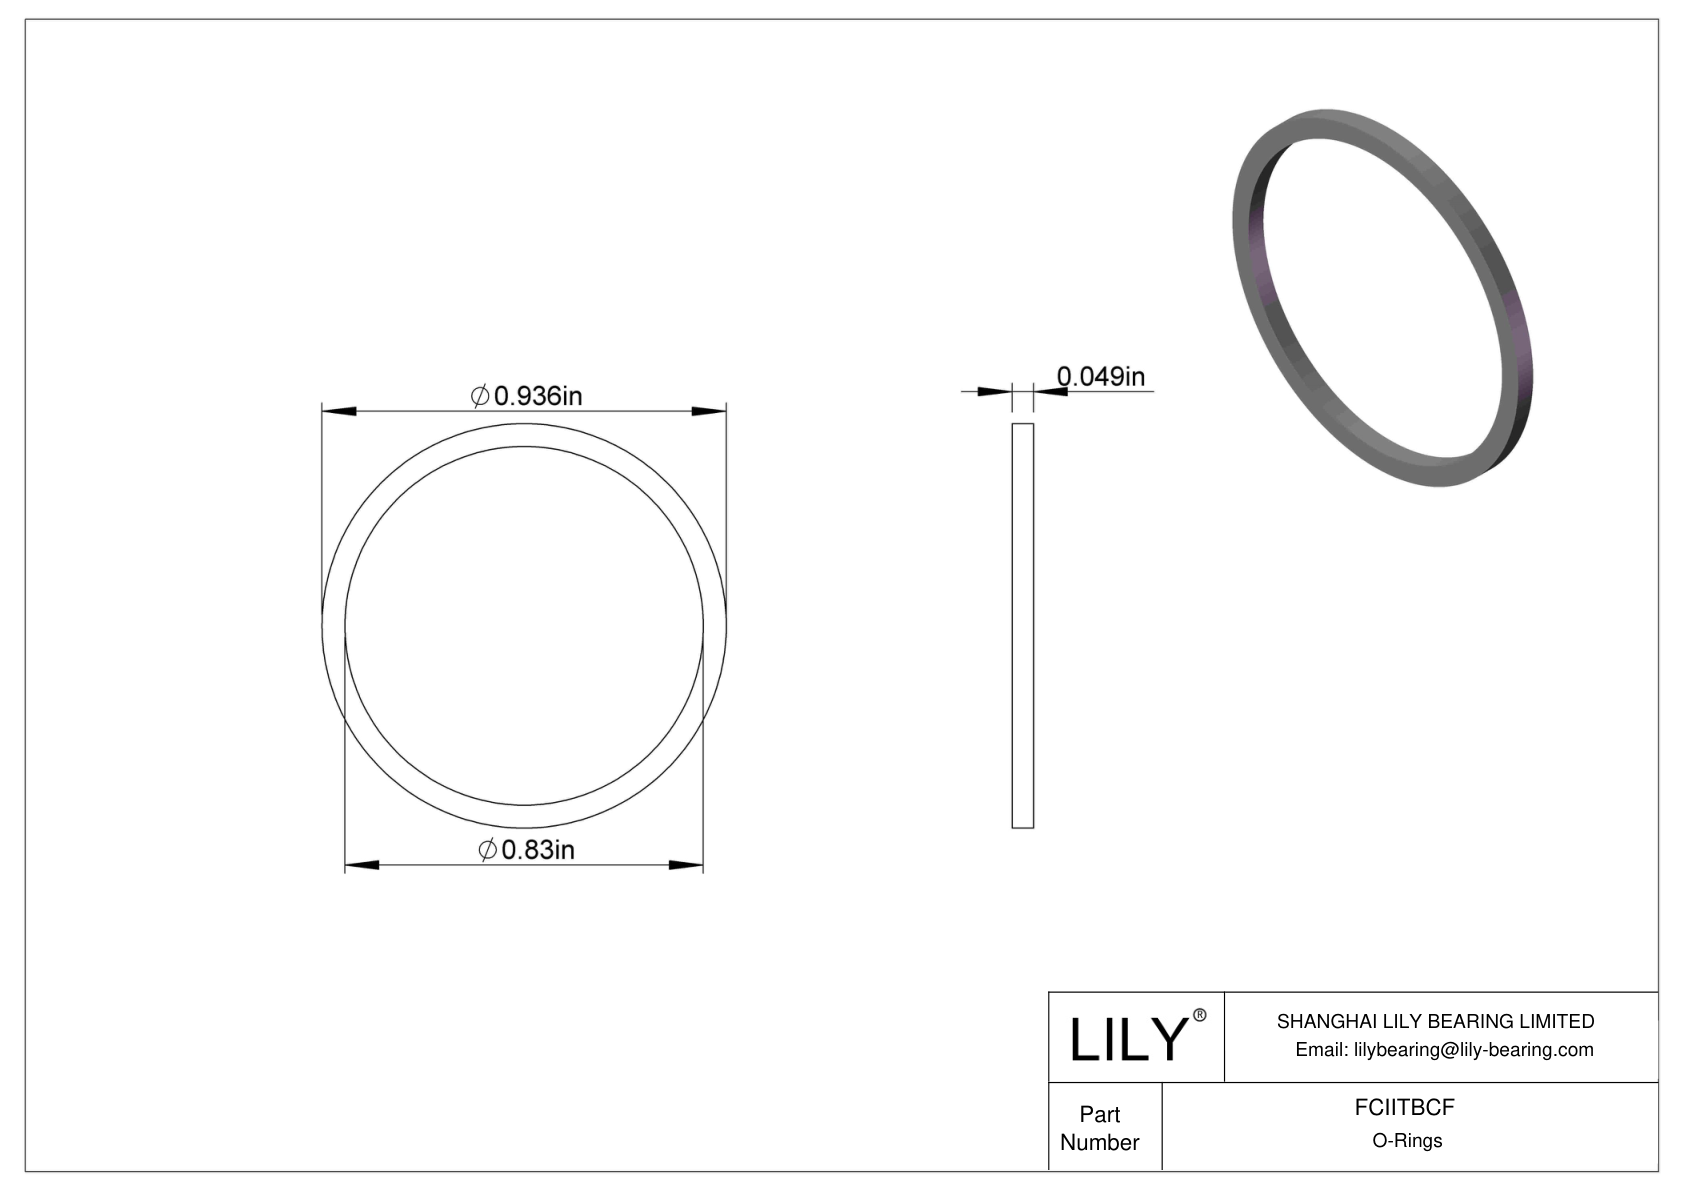 FCIITBCF O-Ring Backup Rings cad drawing